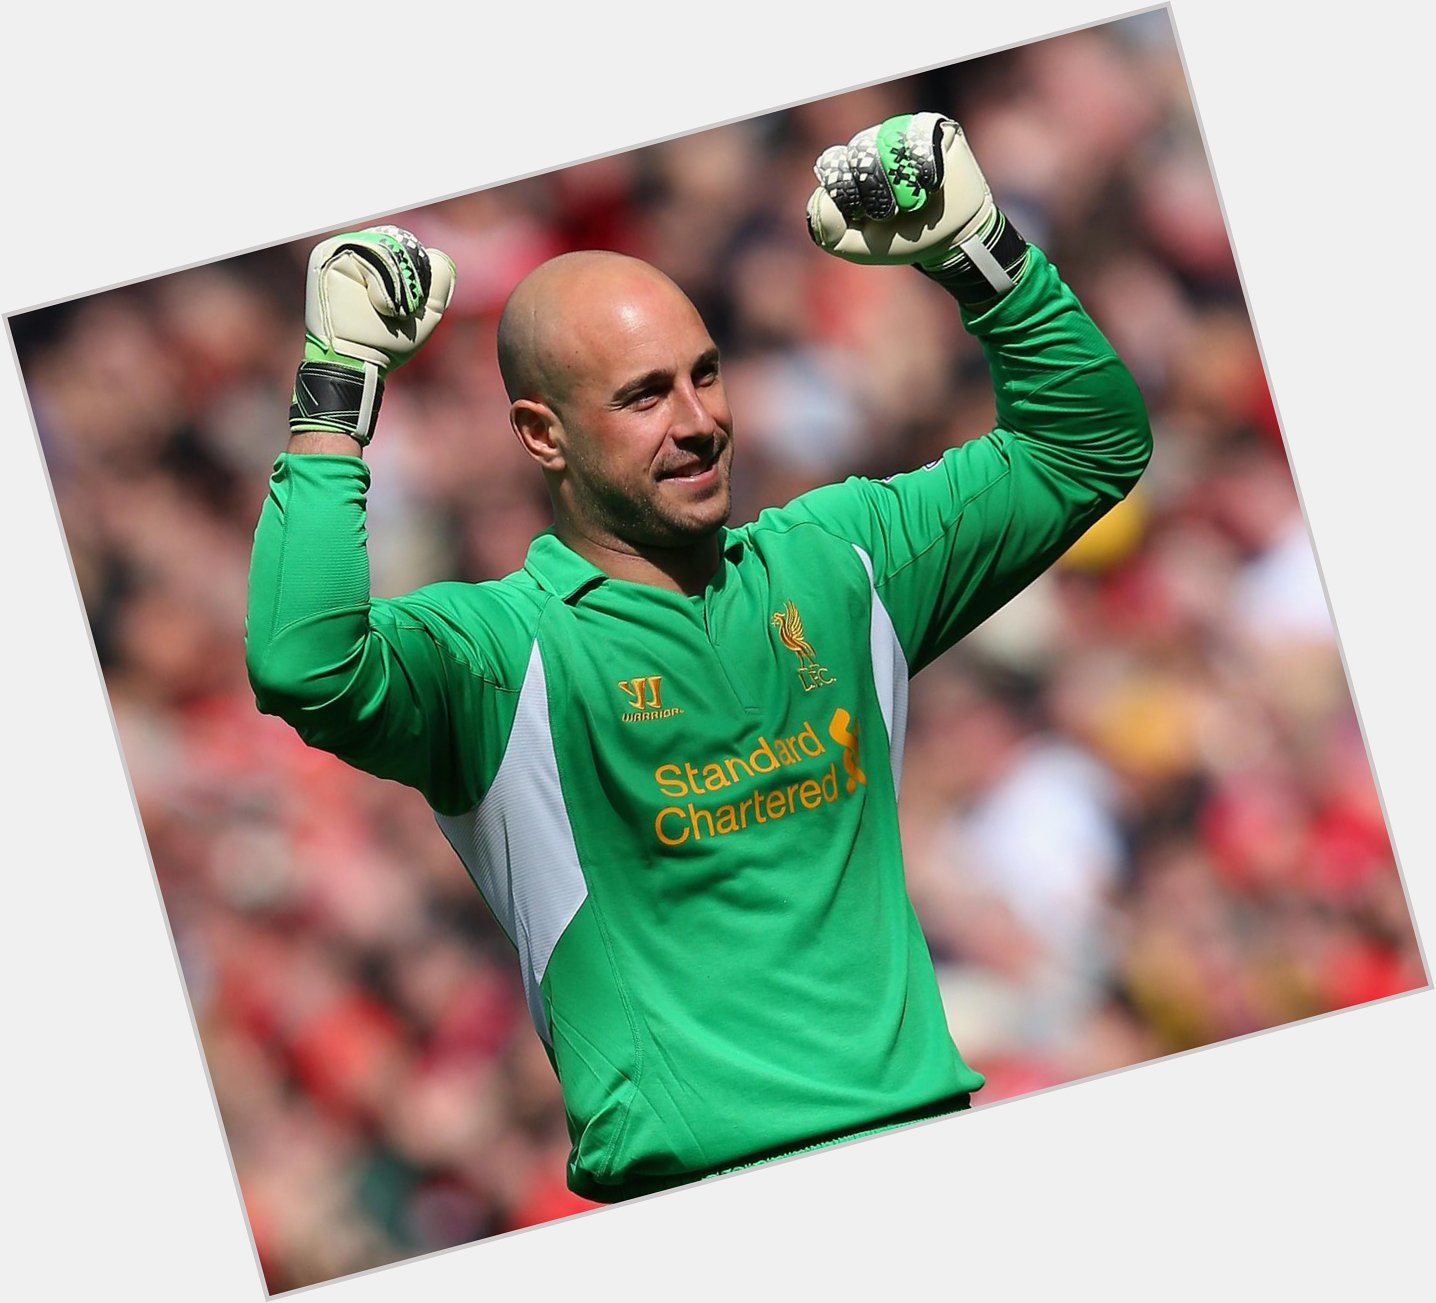 Happy birthday Pepe Reina, who turns 33 today. All the best, Pepe! 